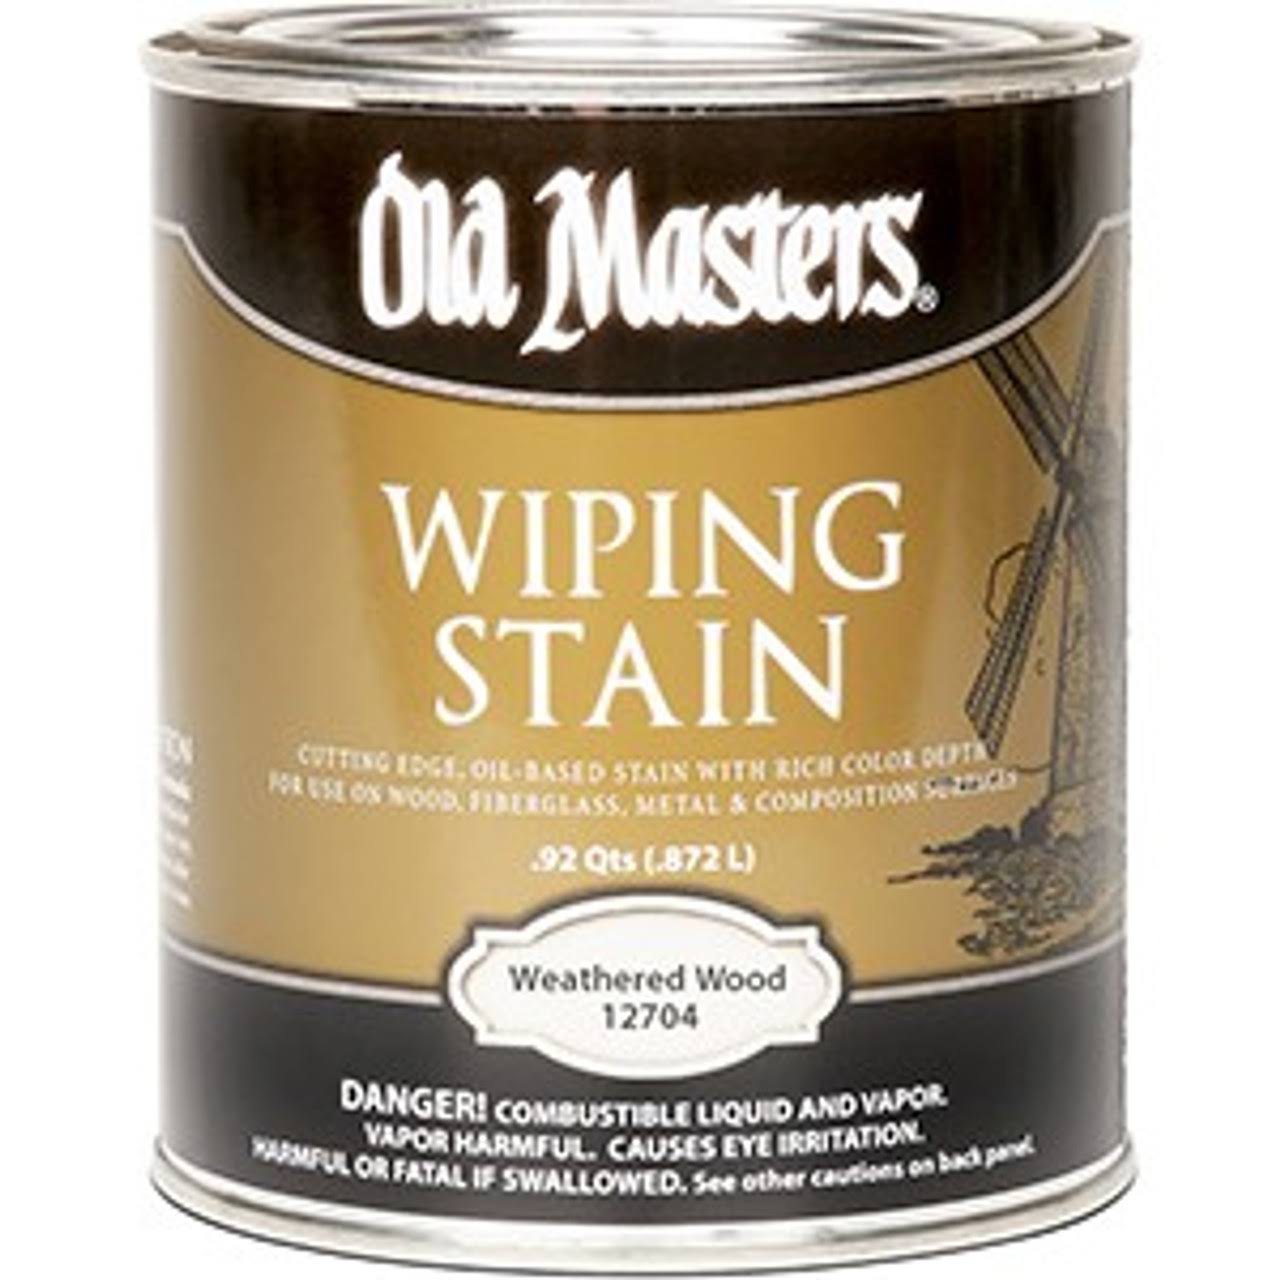 Old Masters Wiping Stain - Weathered Wood